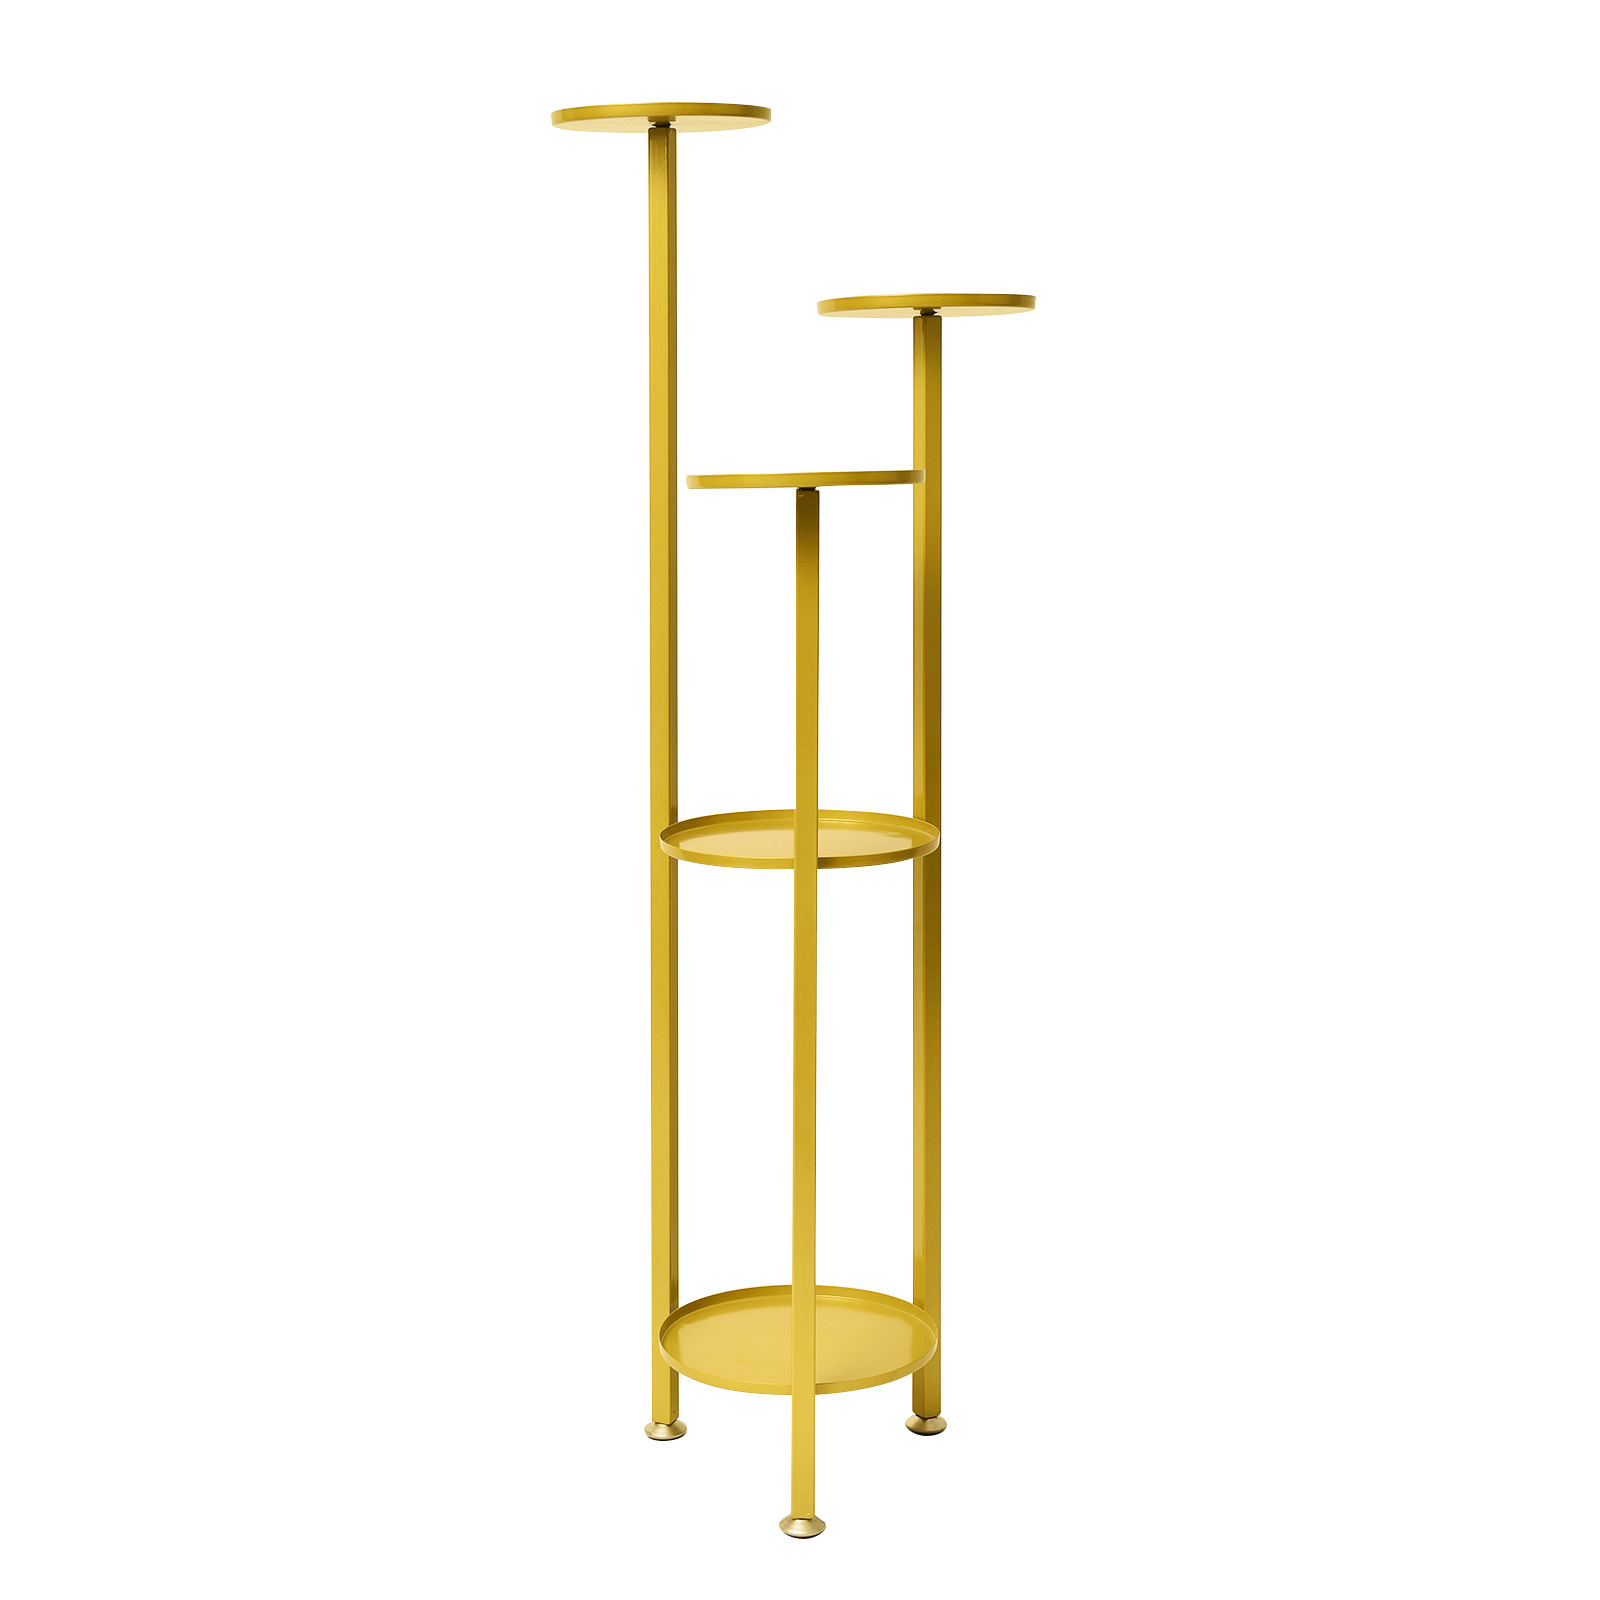 122cm Plant Stand 5 Tier - GOLD